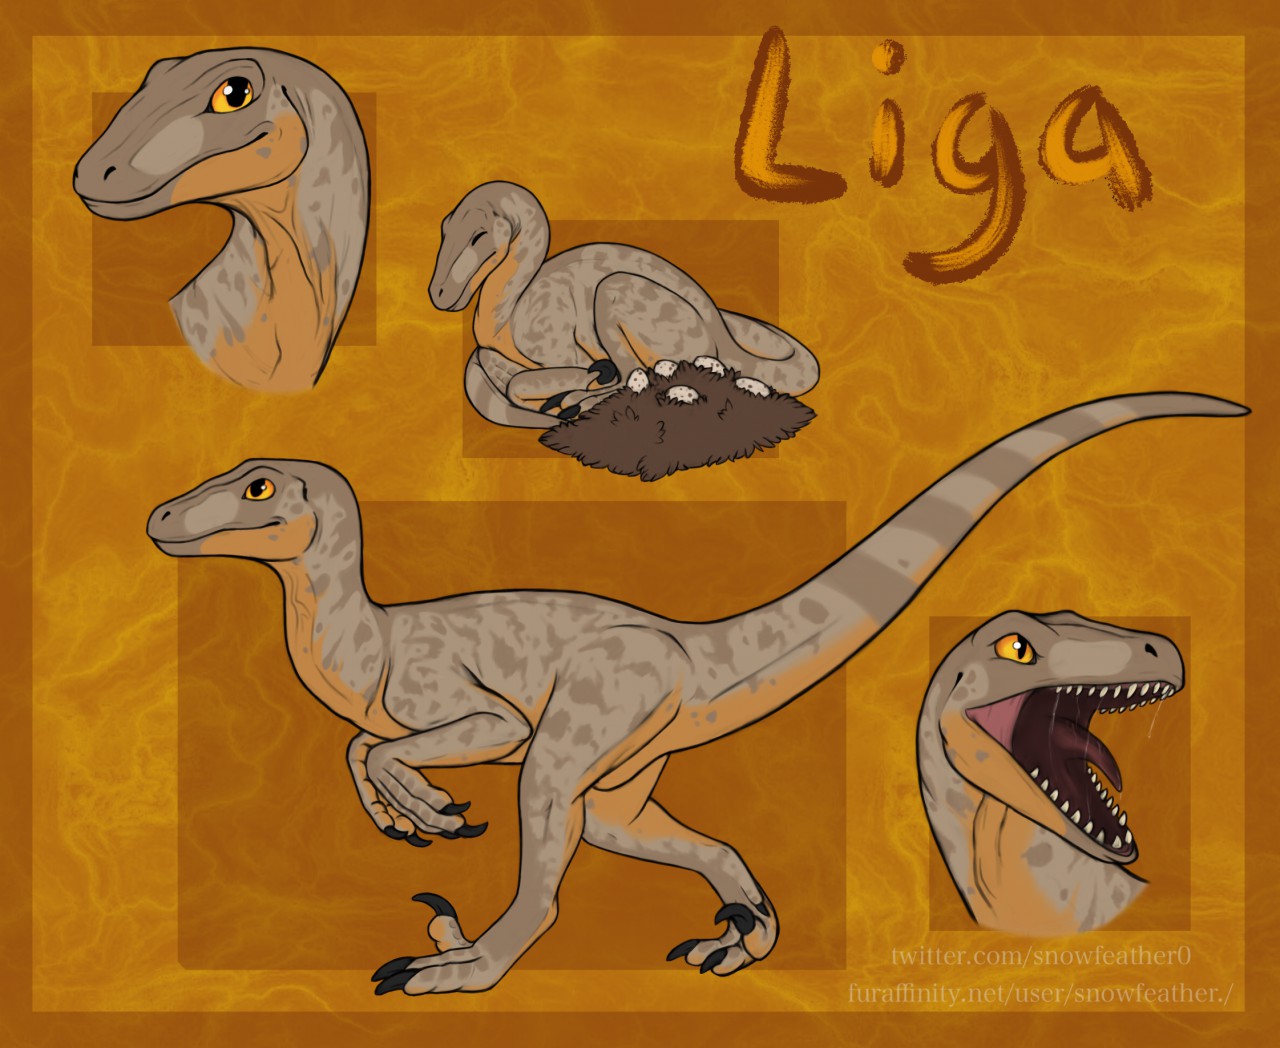 Image titled Utahraptor Reference, by SnowFeather.